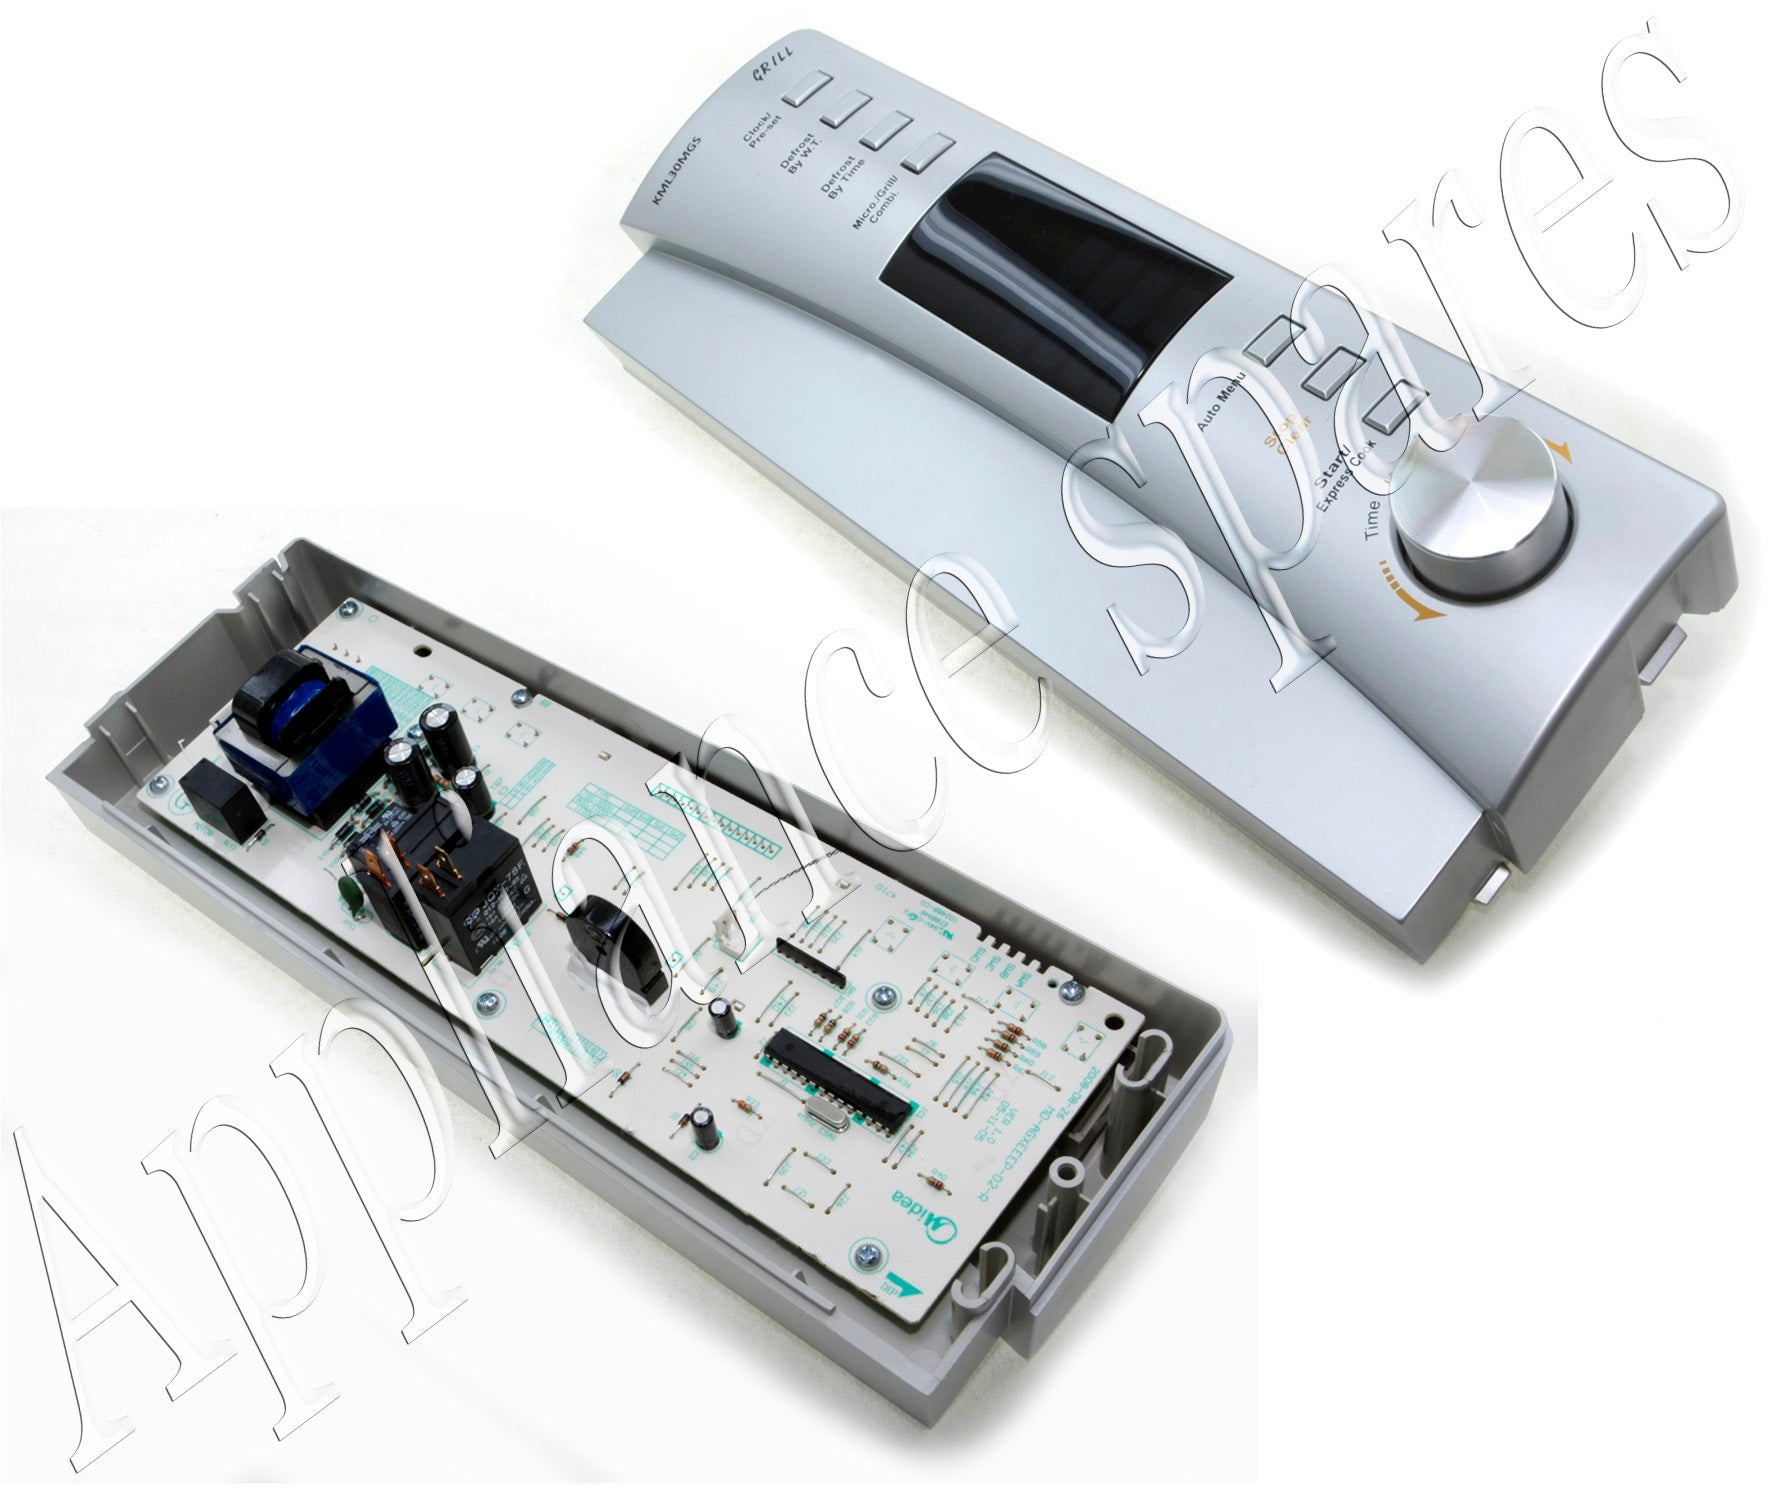 Kelvinator Microwave Oven Control Panel Assembly with Pc Board